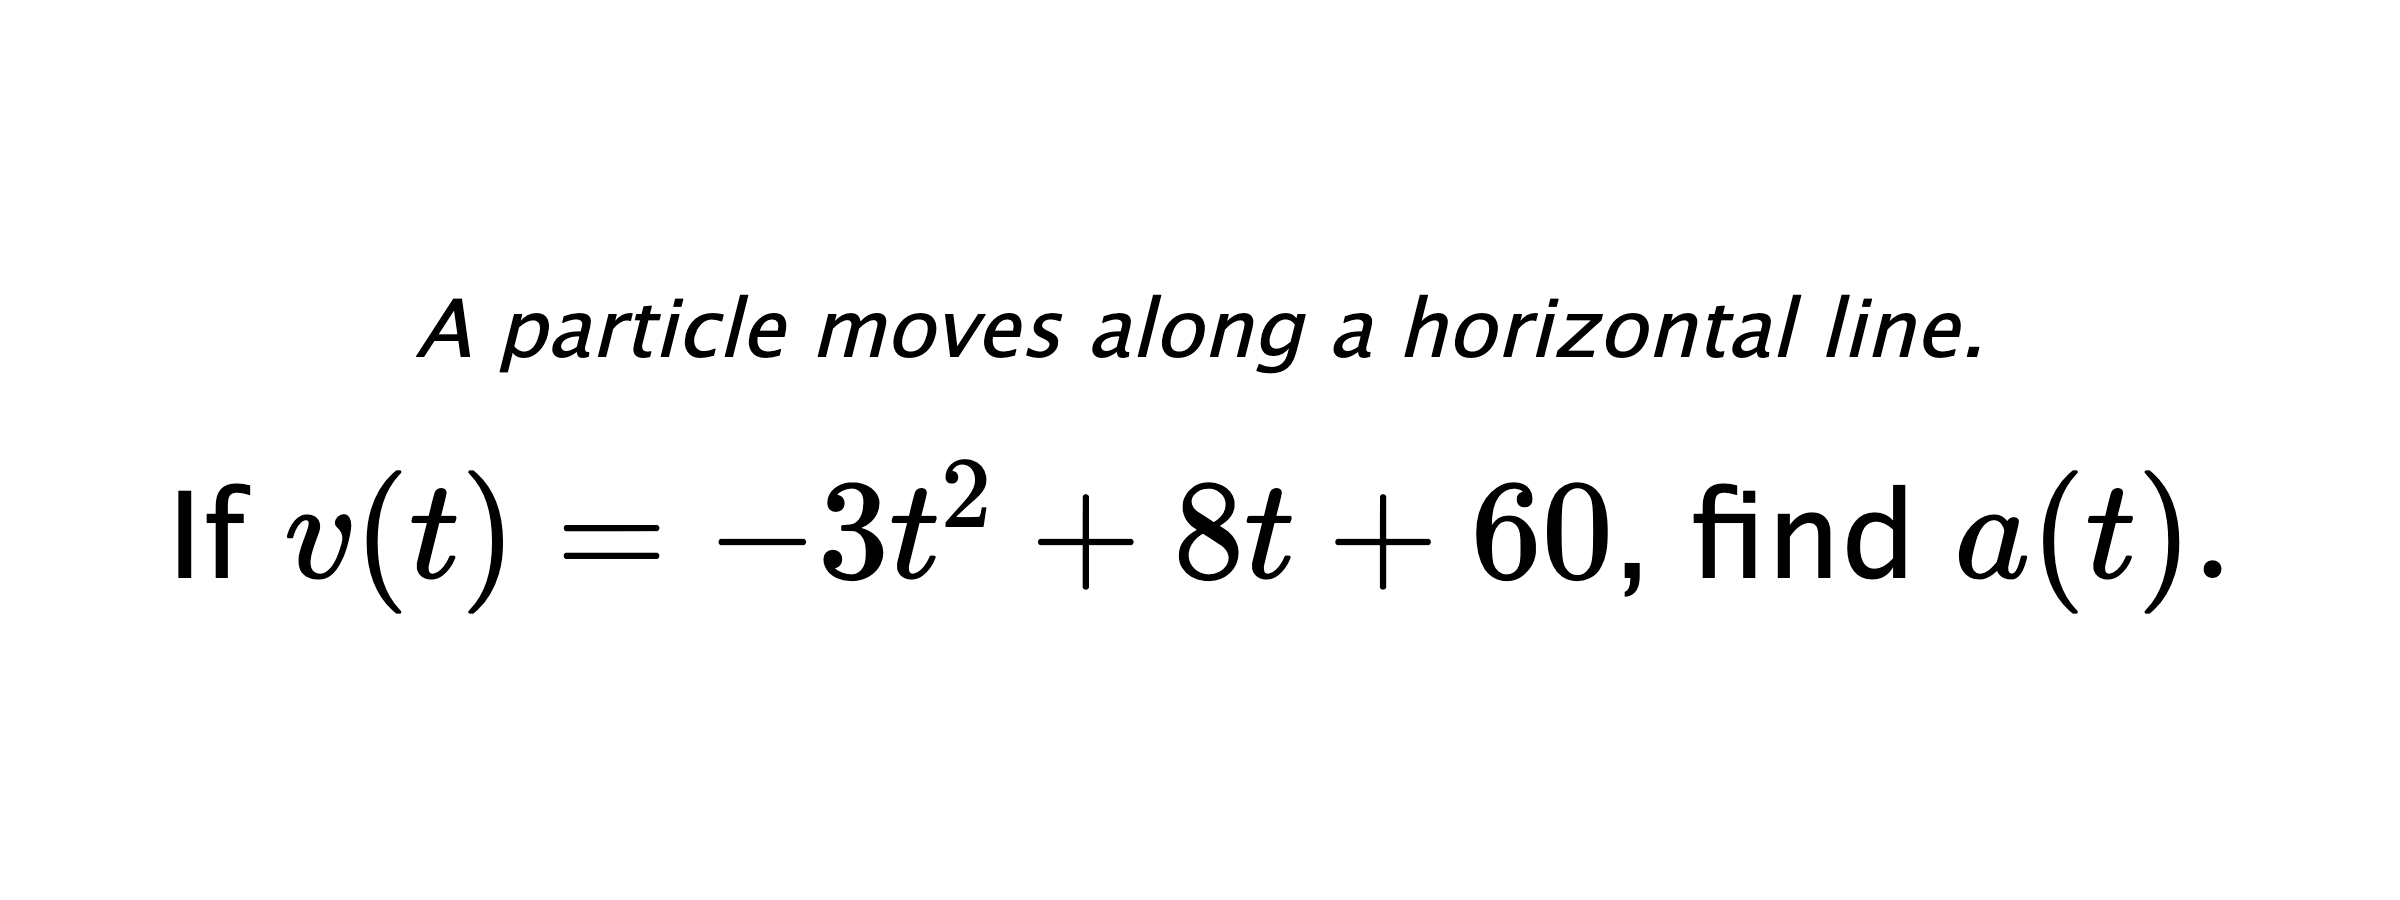 A particle moves along a horizontal line. If $ v(t)=-3t^2+8t+60 $, find $ a(t) .$